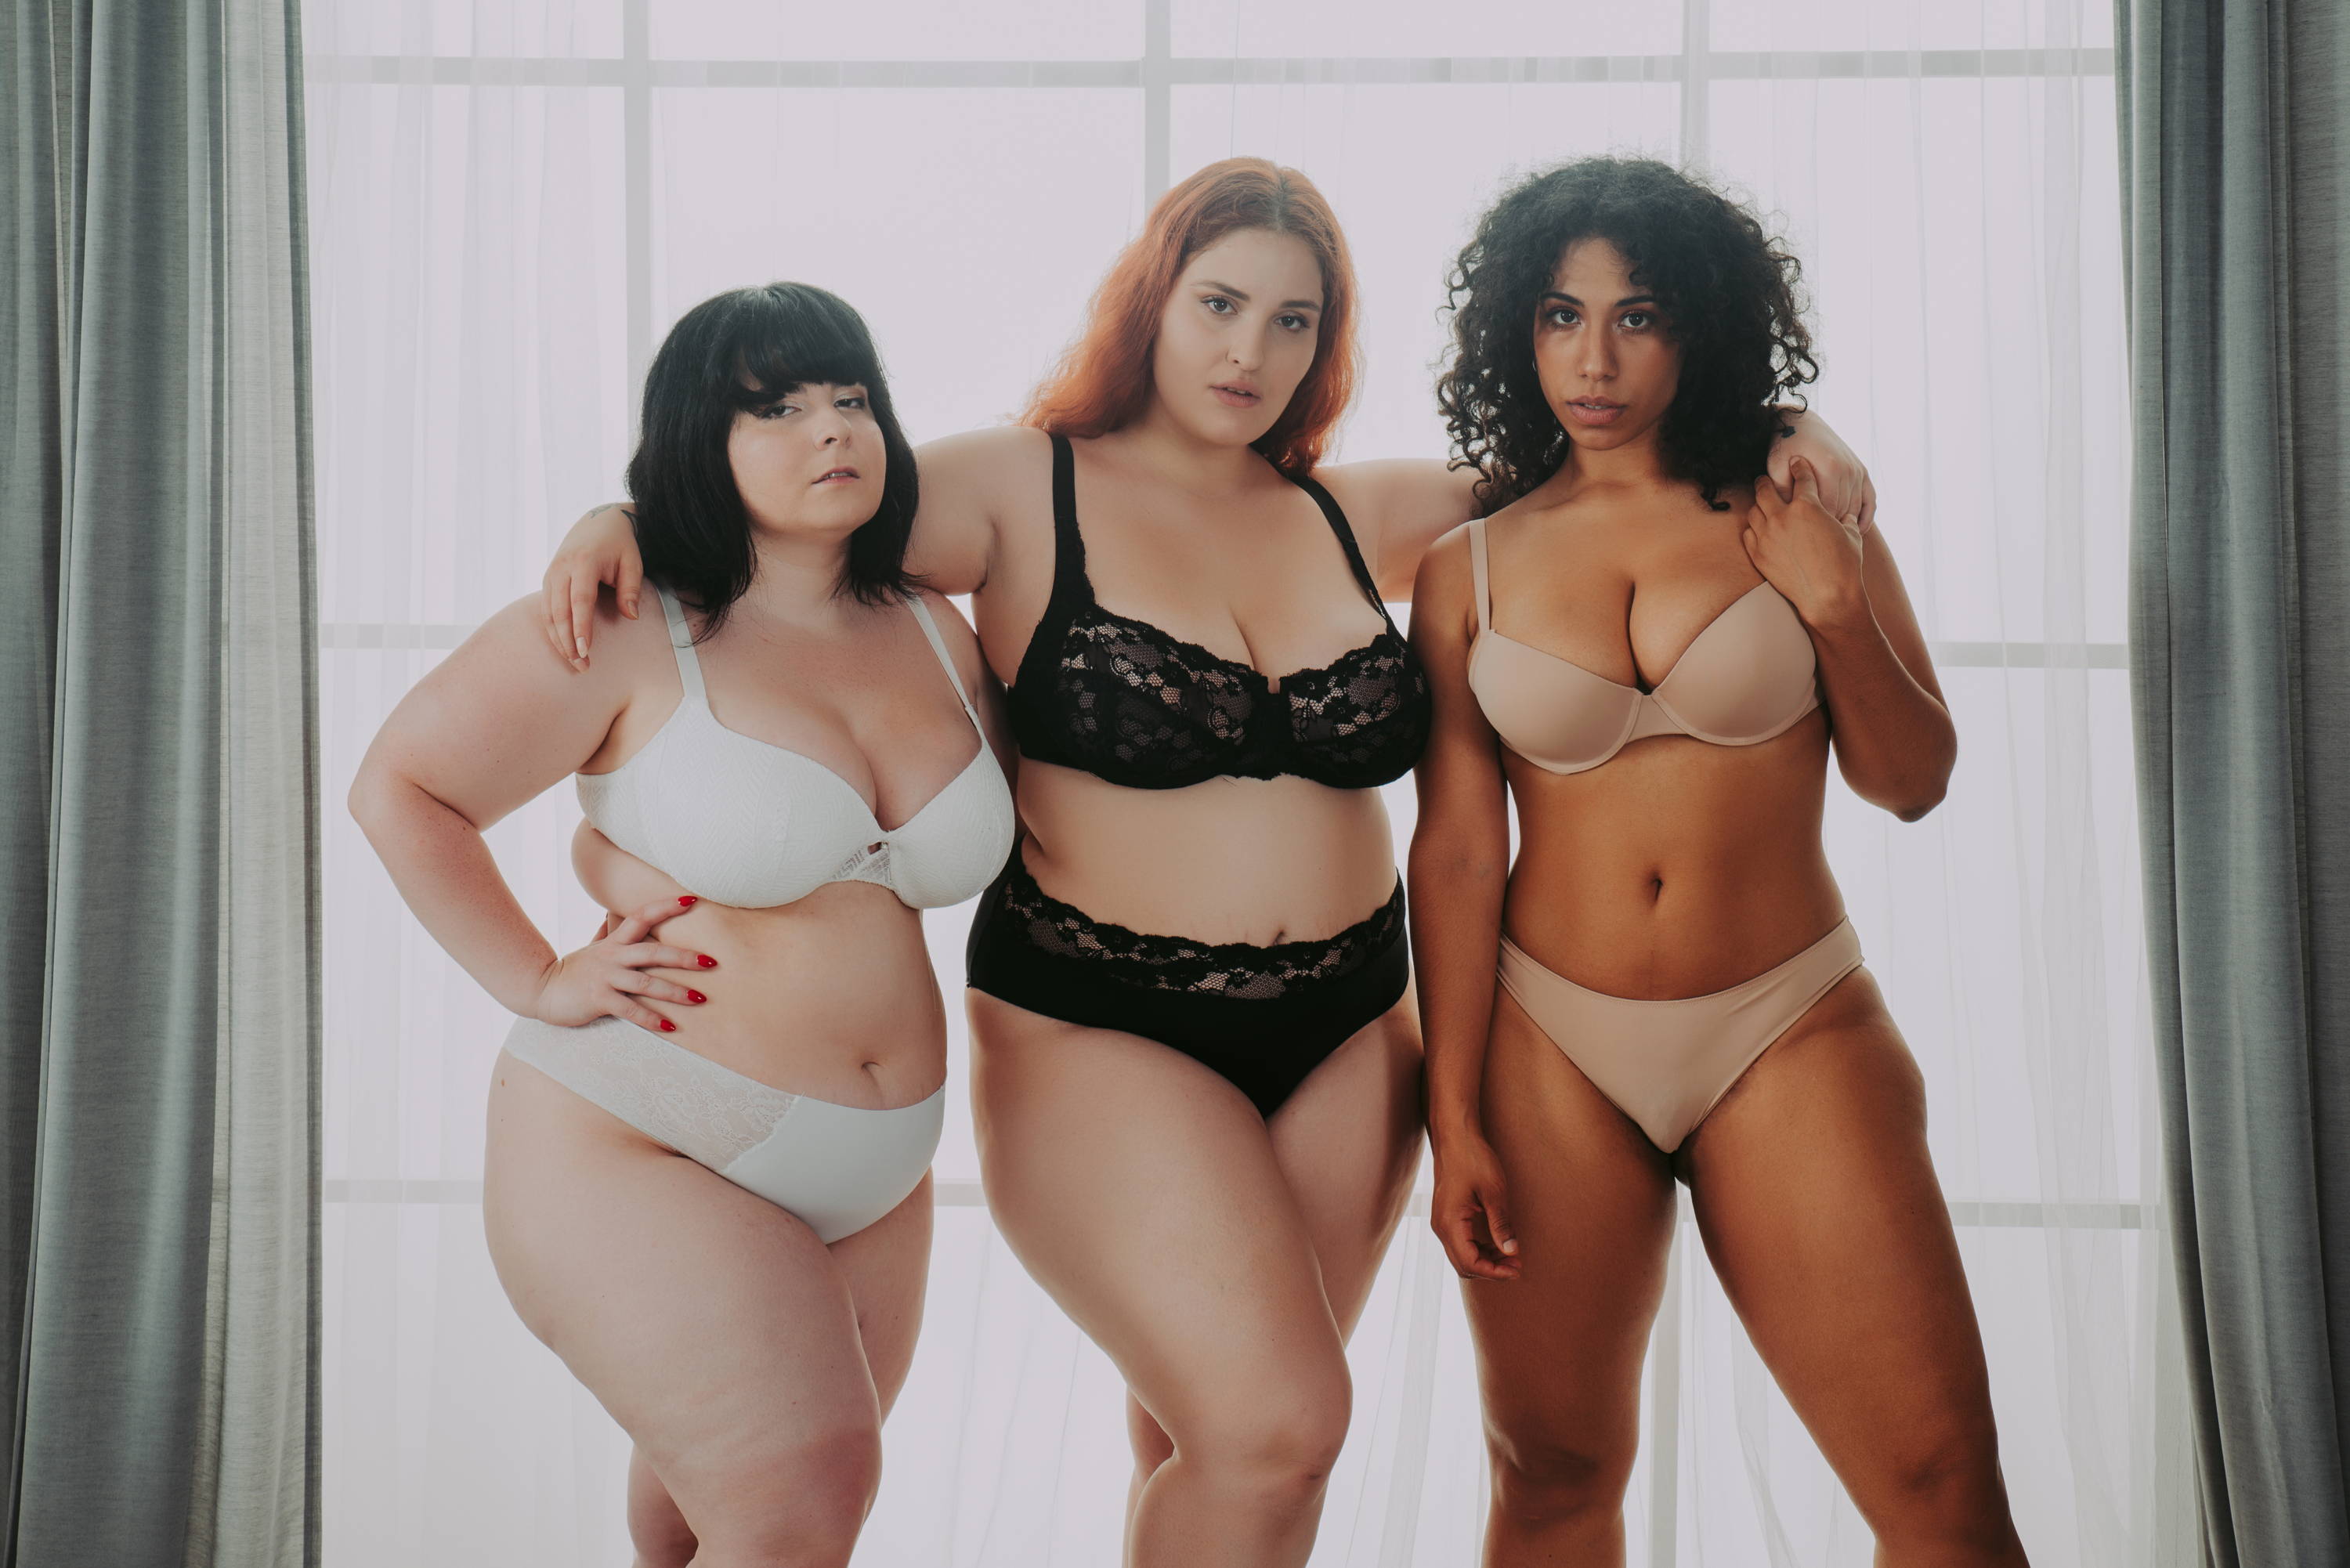 3 women in lingerie sets posing for a photo